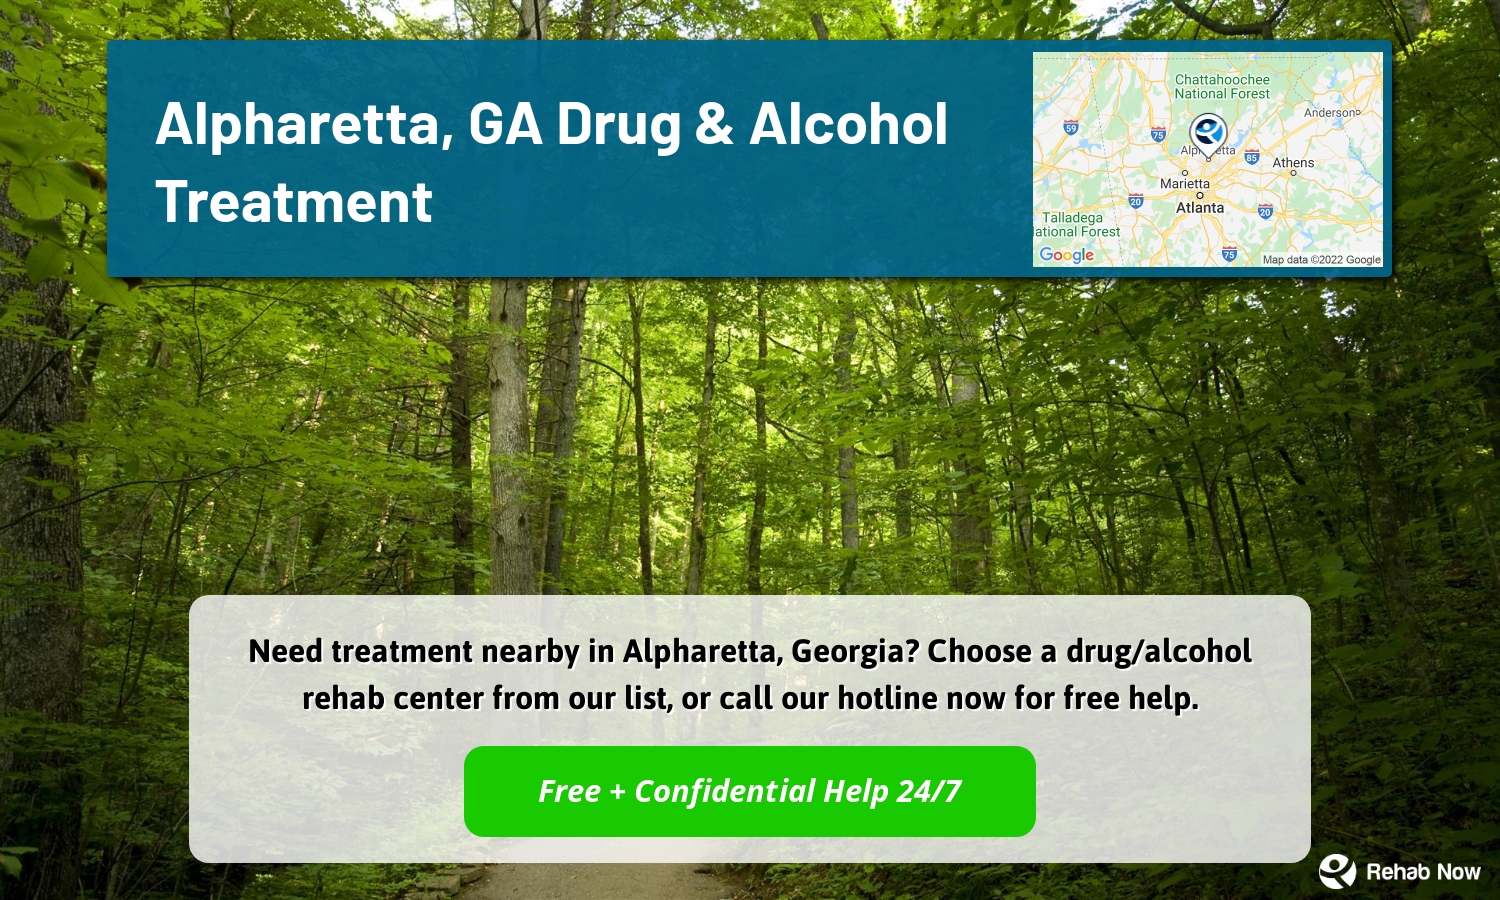 Need treatment nearby in Alpharetta, Georgia? Choose a drug/alcohol rehab center from our list, or call our hotline now for free help.